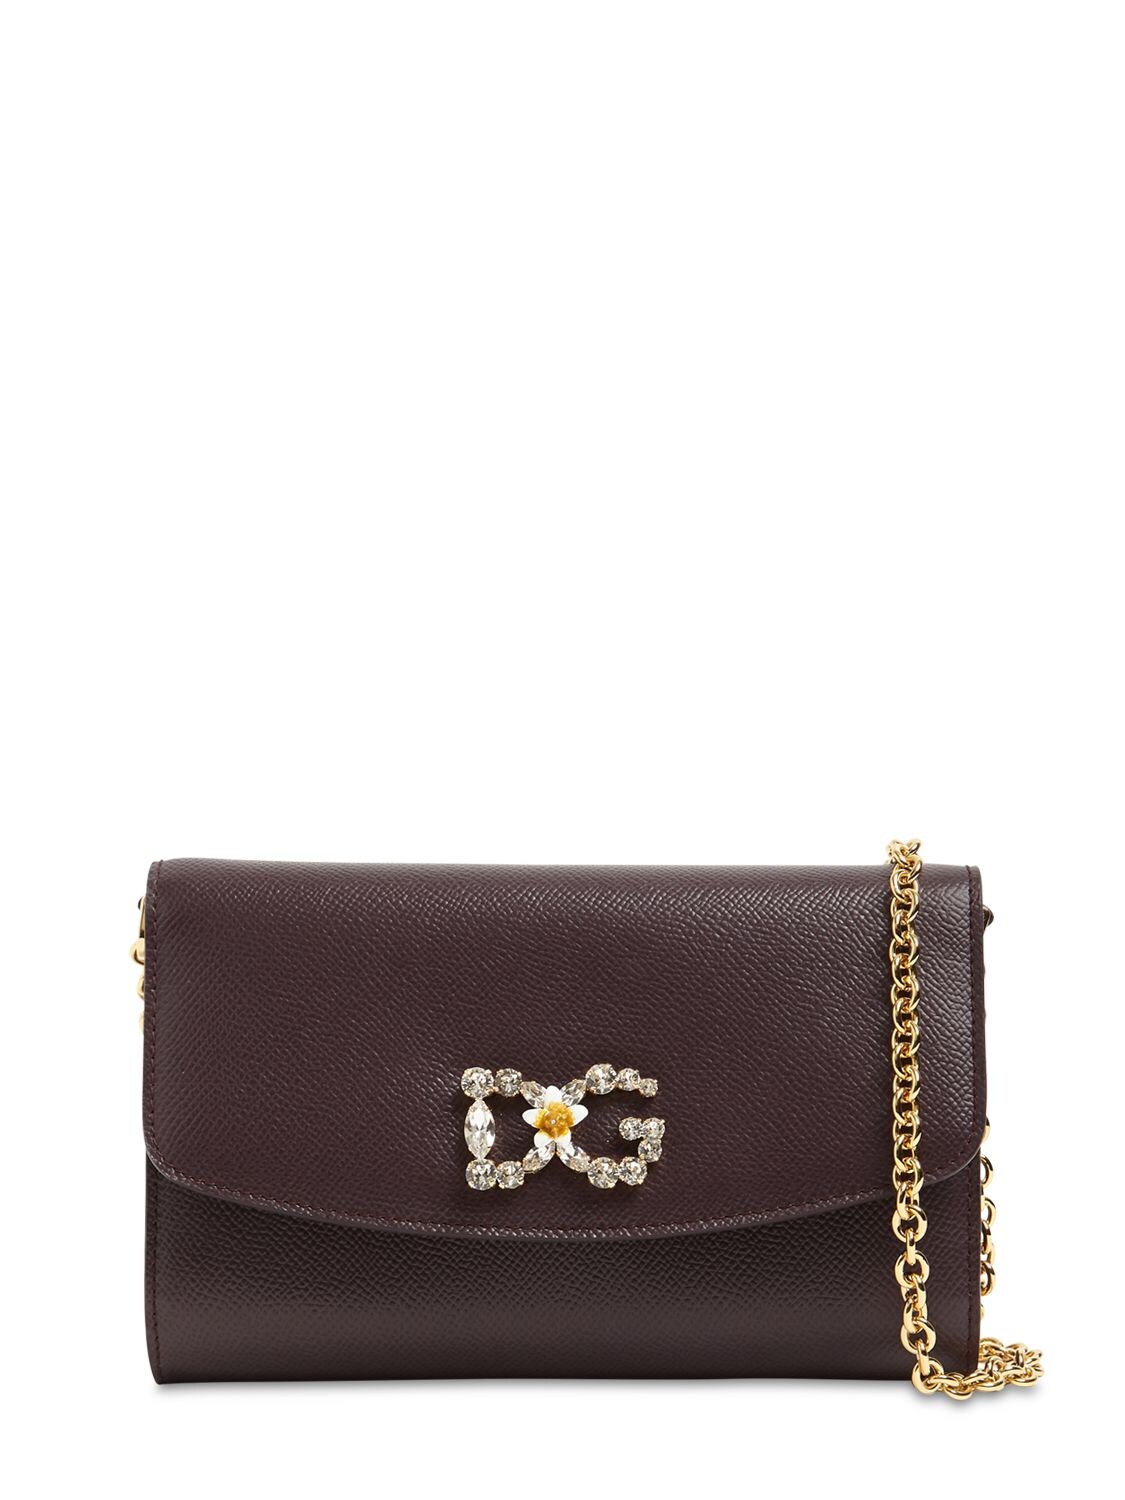 Dolce & Gabbana Dauphine Embellished Leather Bag In Mosto